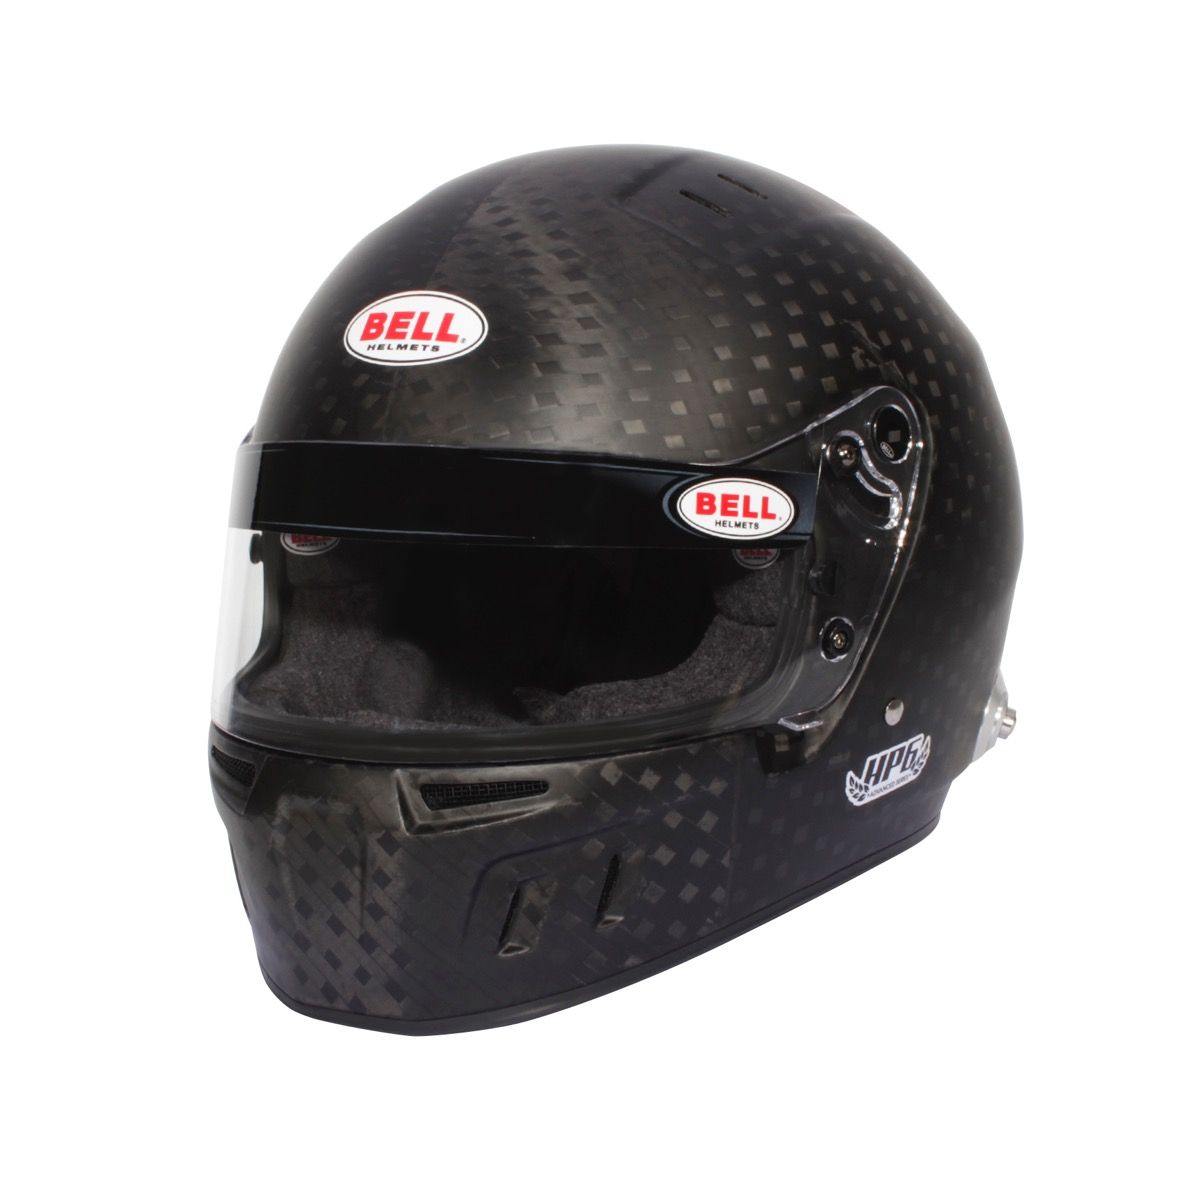 Bell HP6 8860-2018 Carbon Fiber Helmet - Front View Image  Gain a detailed look at the Bell HP6 8860-2018 Carbon Fiber Helmet from the front in this image, showcasing its advanced design.